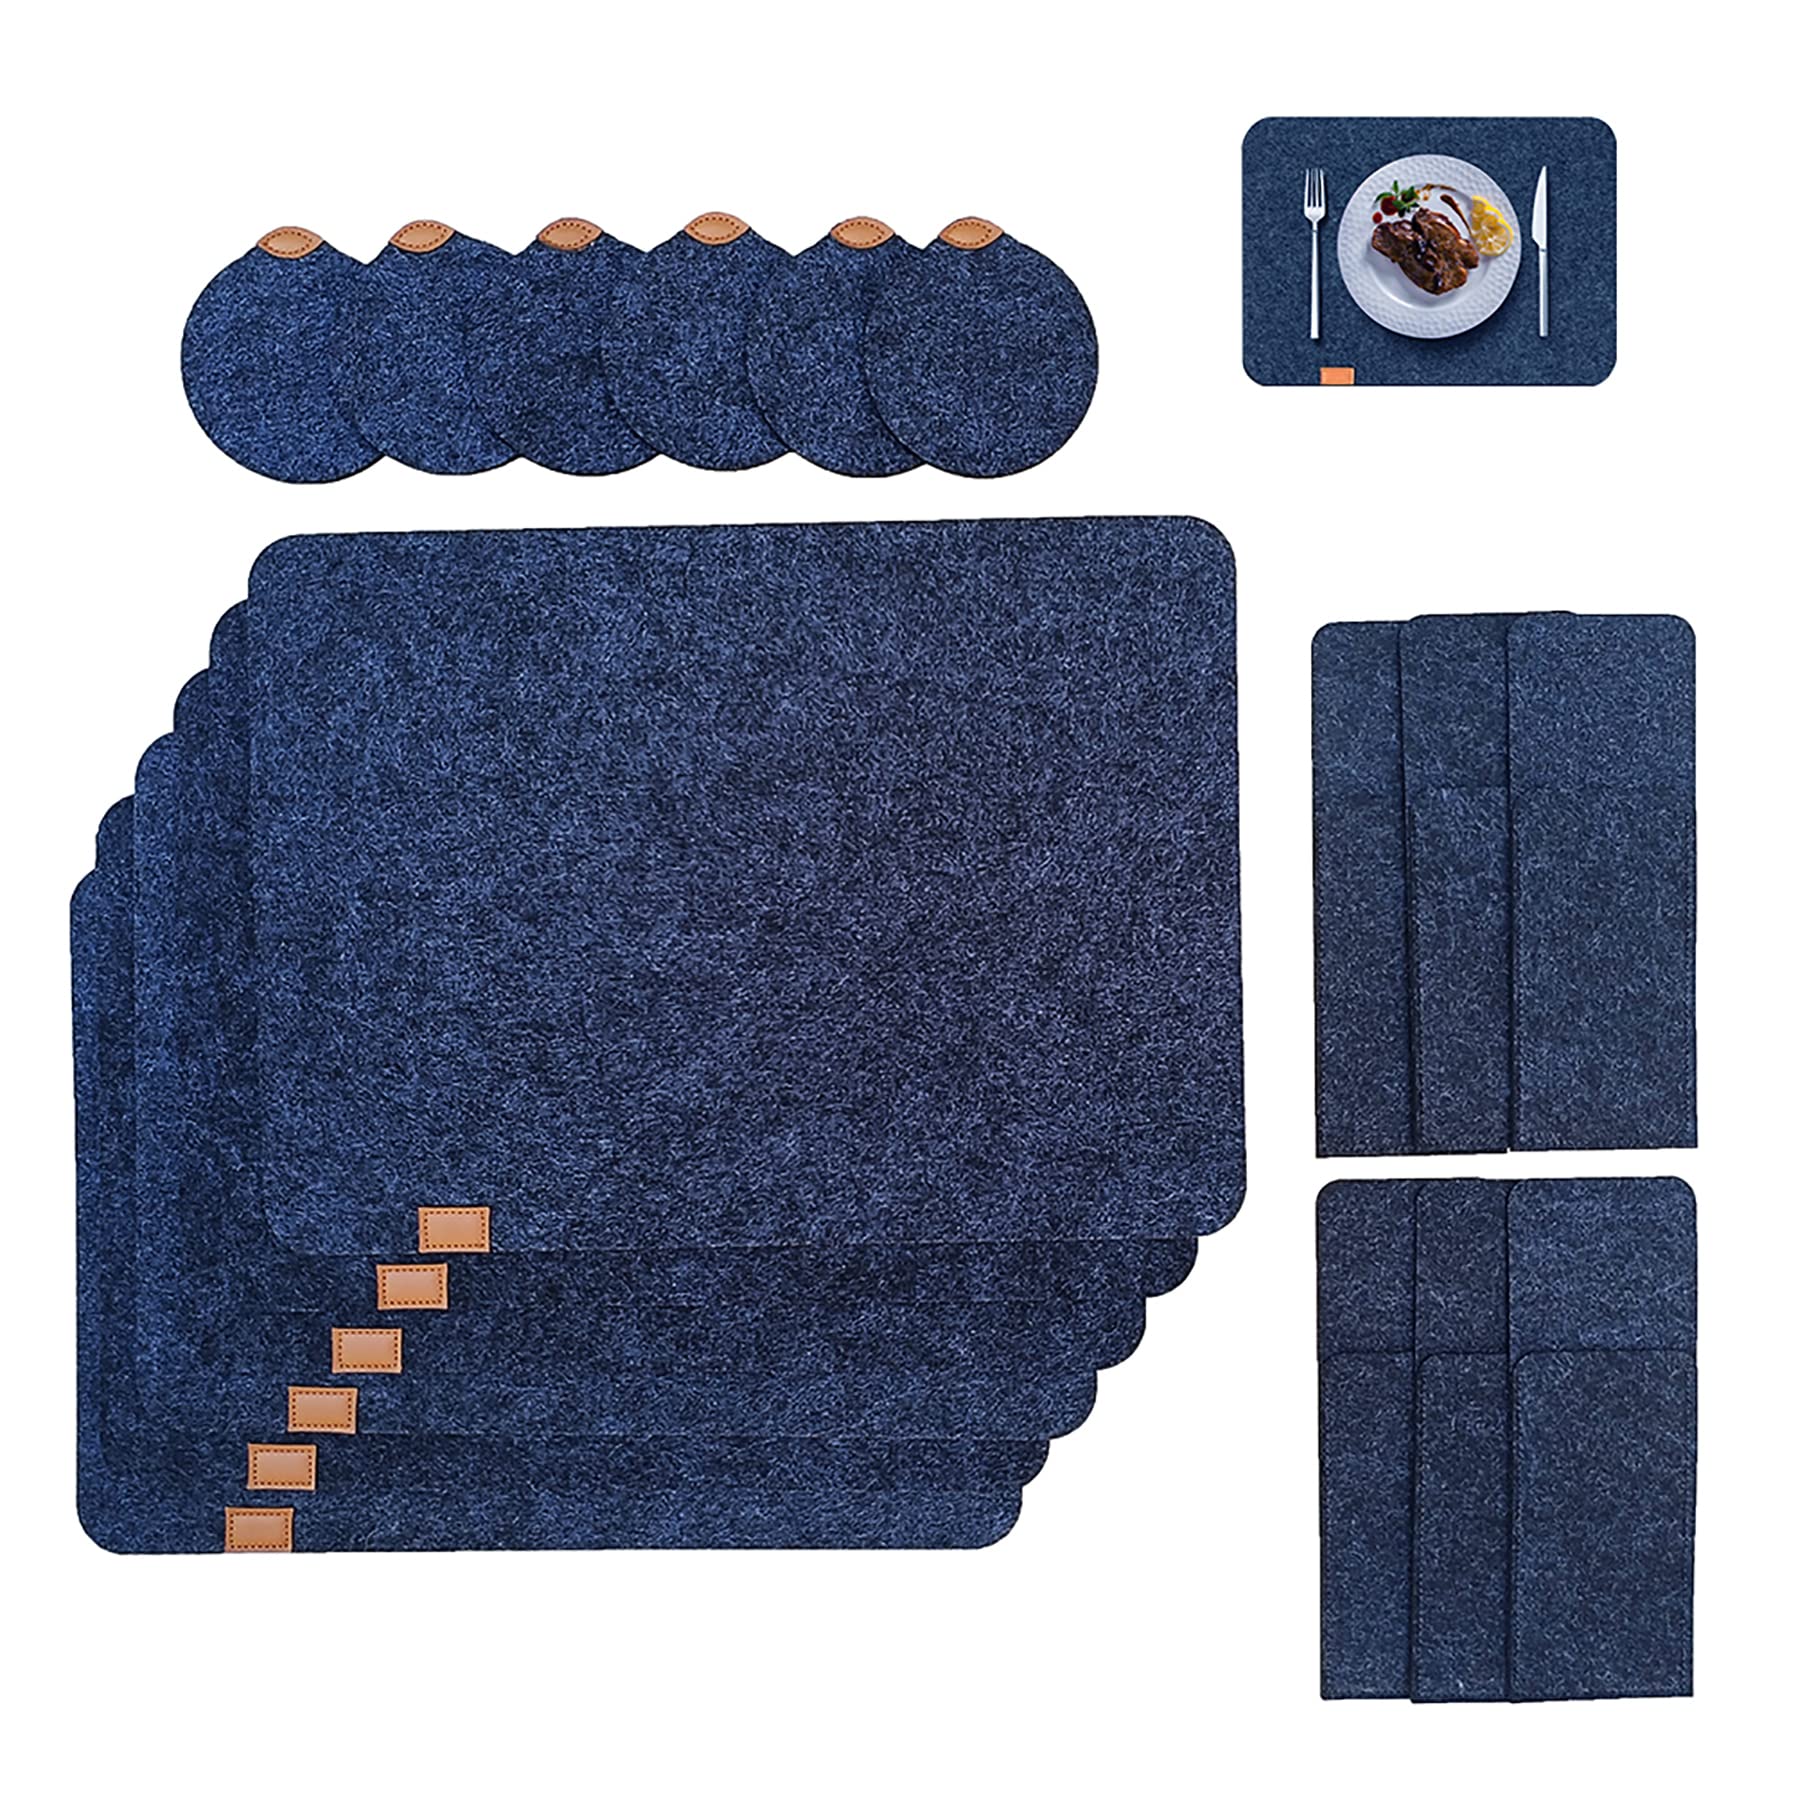 PriceList for Desk Jewelry Organizer - 6 sets of placemats, washable felt table mat, anti-slip, heat and stain resistant kitchen table mat easy to clean – Junhang